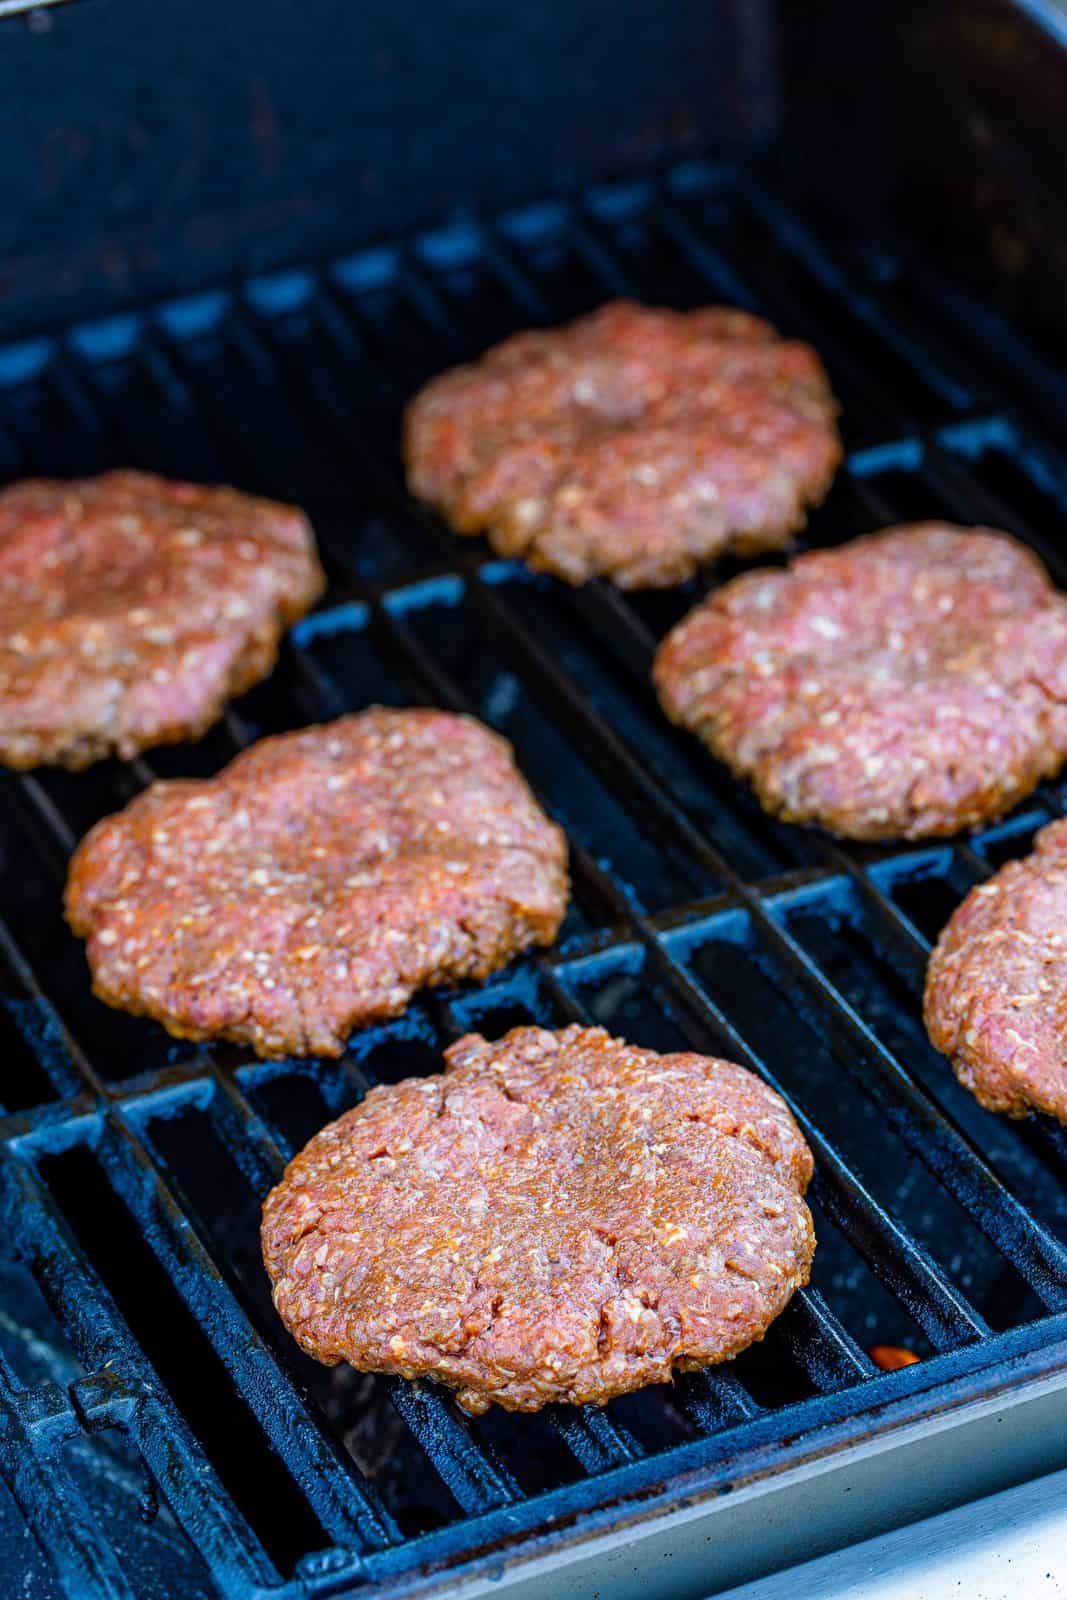 Burgers placed on grill.